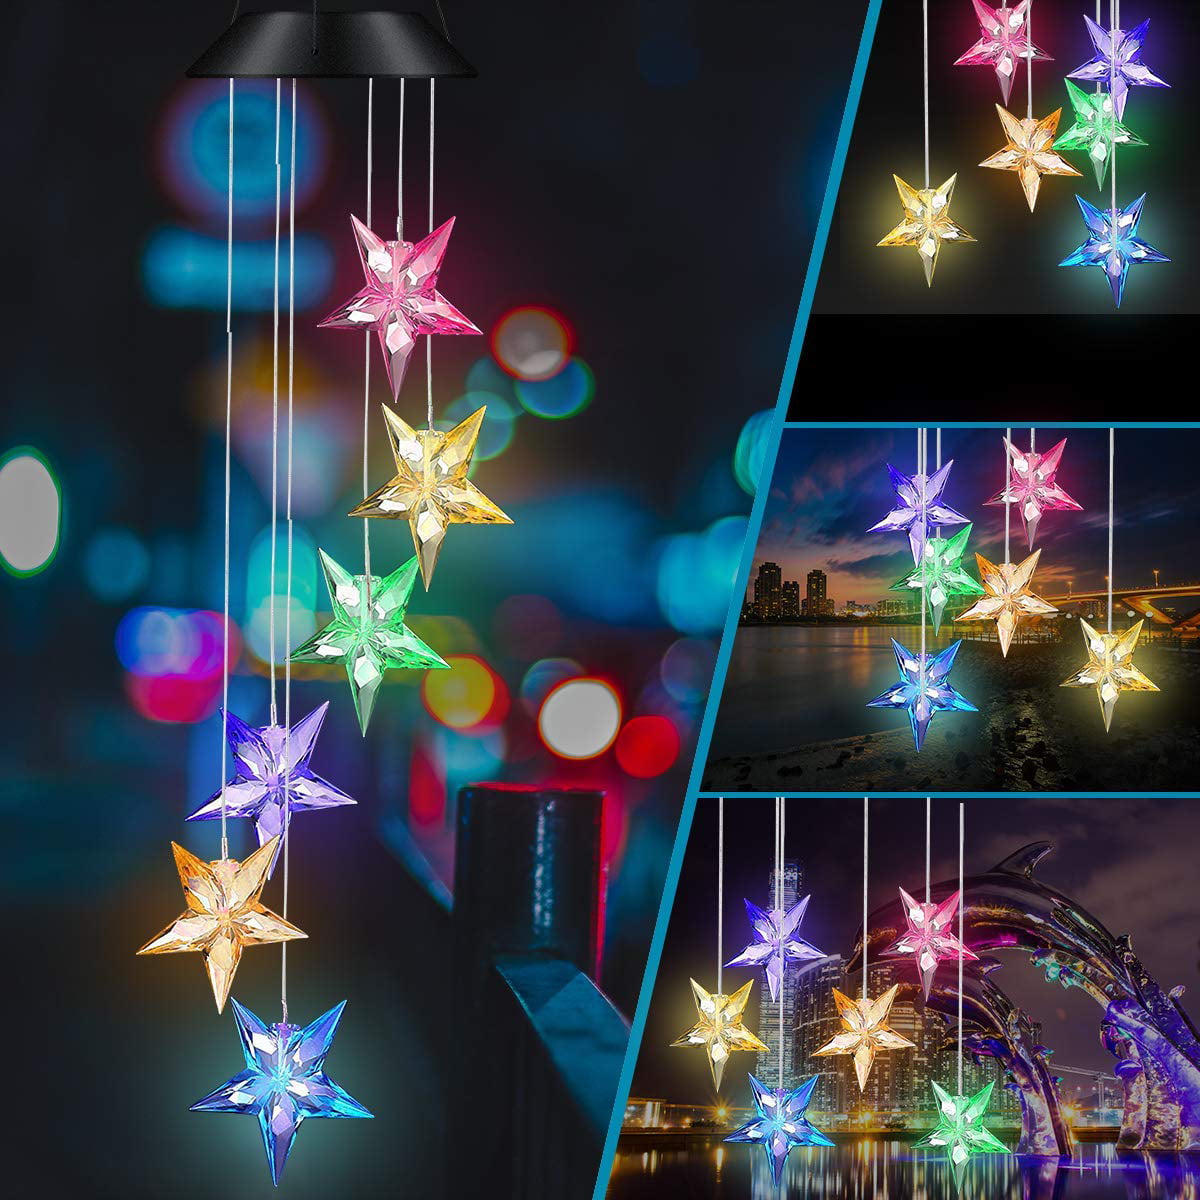 LED Solar Wind Chime Light Solar Stars Wind Chimes Color Changing Wind Chimes Outdoor Durable Solar Power Sensor Wind Chimes Lamp for Outdoor Home